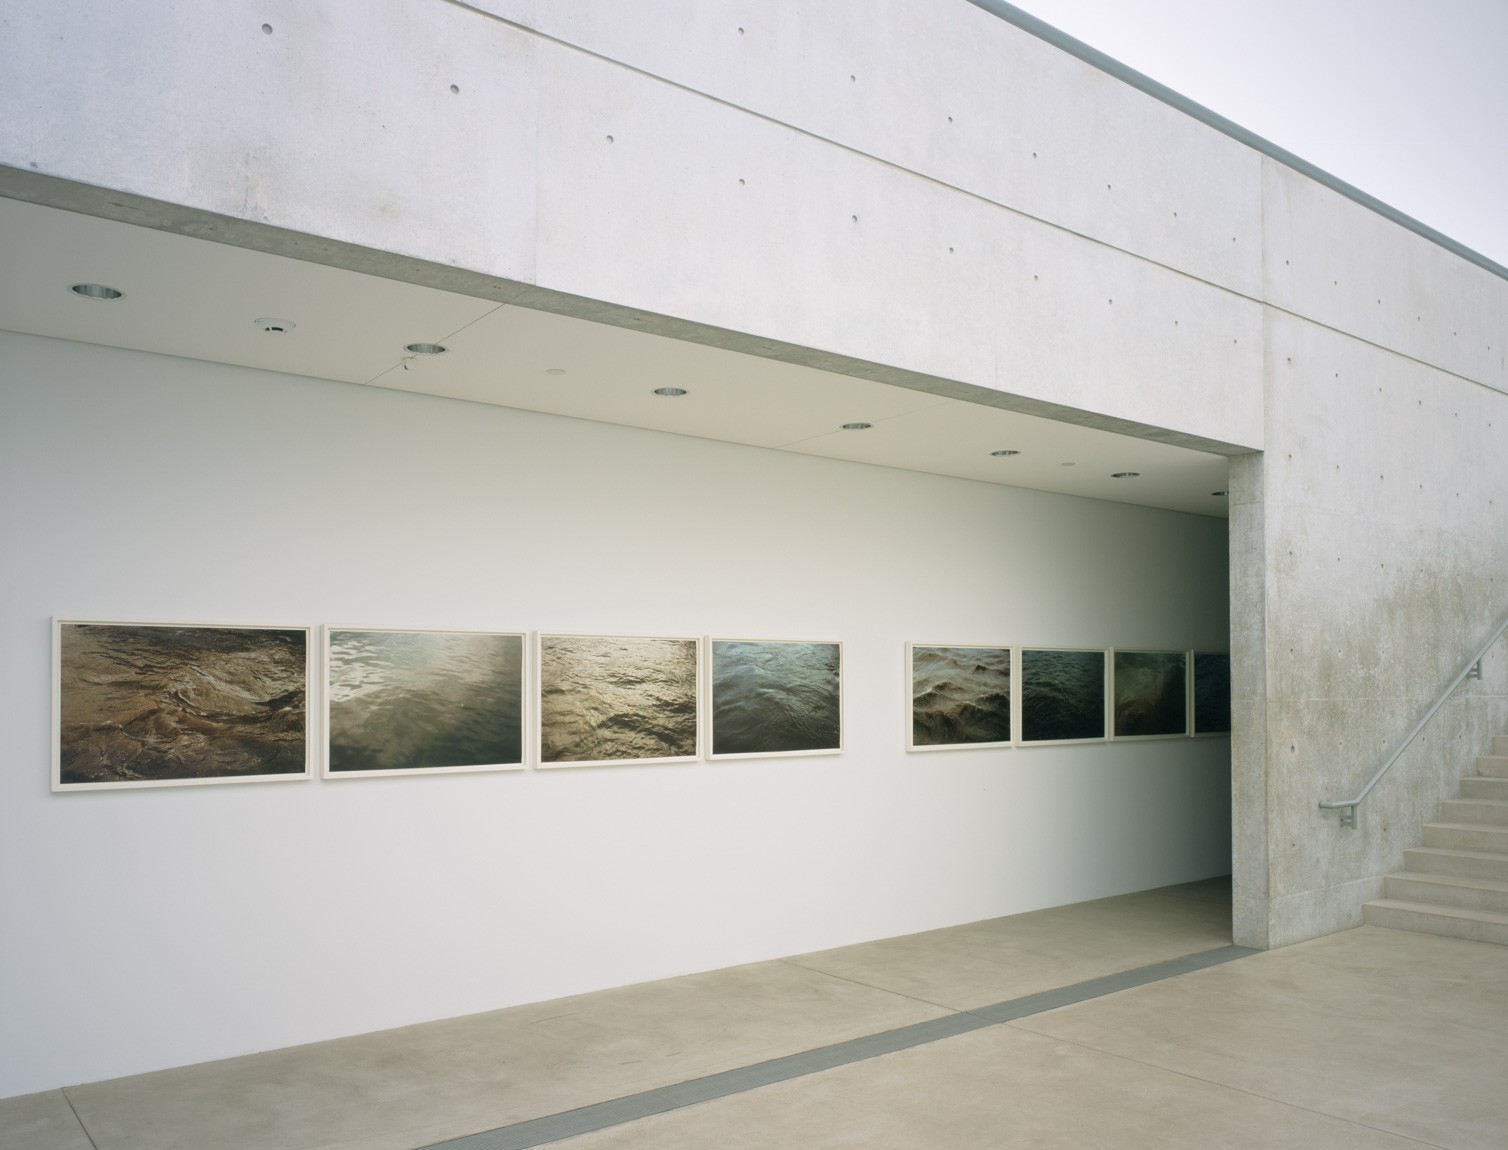 Roni Horn's series of water scene photographs of the Thames titled "Some Thames - Group J" and "Some Thames - Group E" are displayed in a row on the Lower Corridor wall.